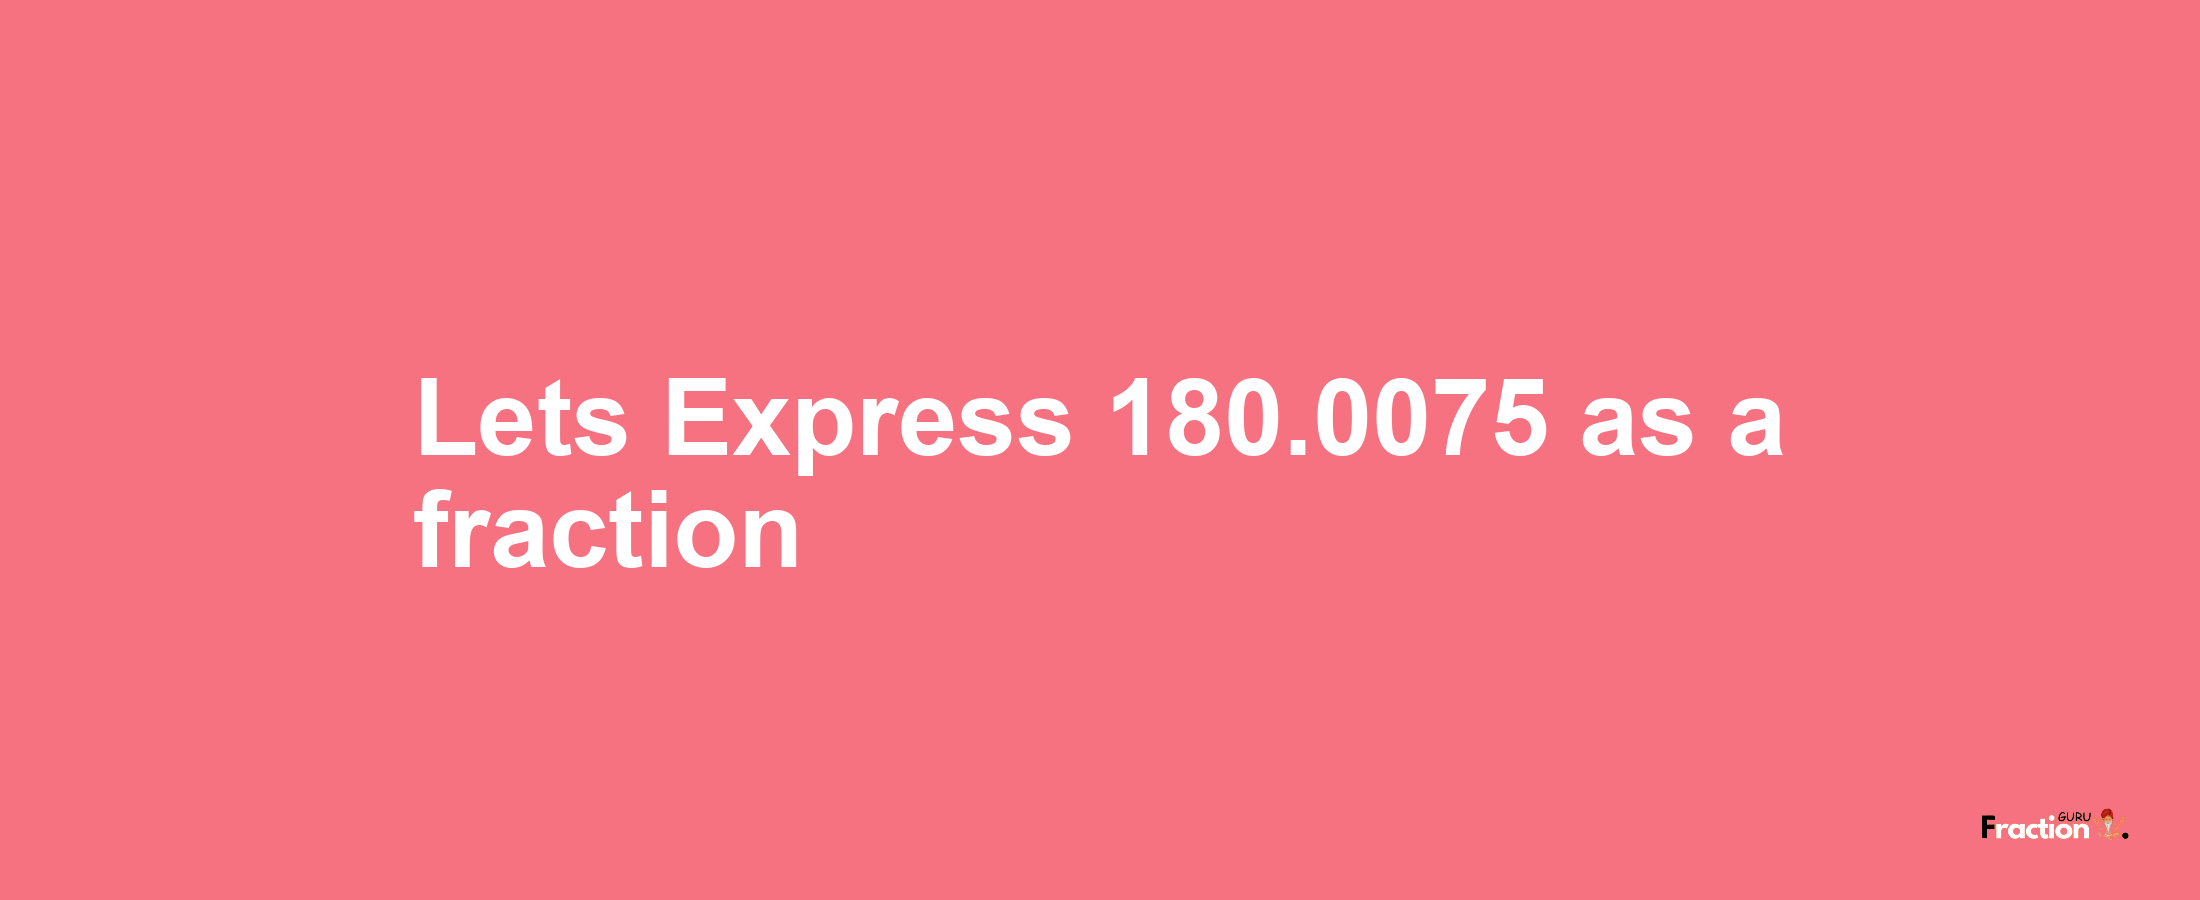 Lets Express 180.0075 as afraction